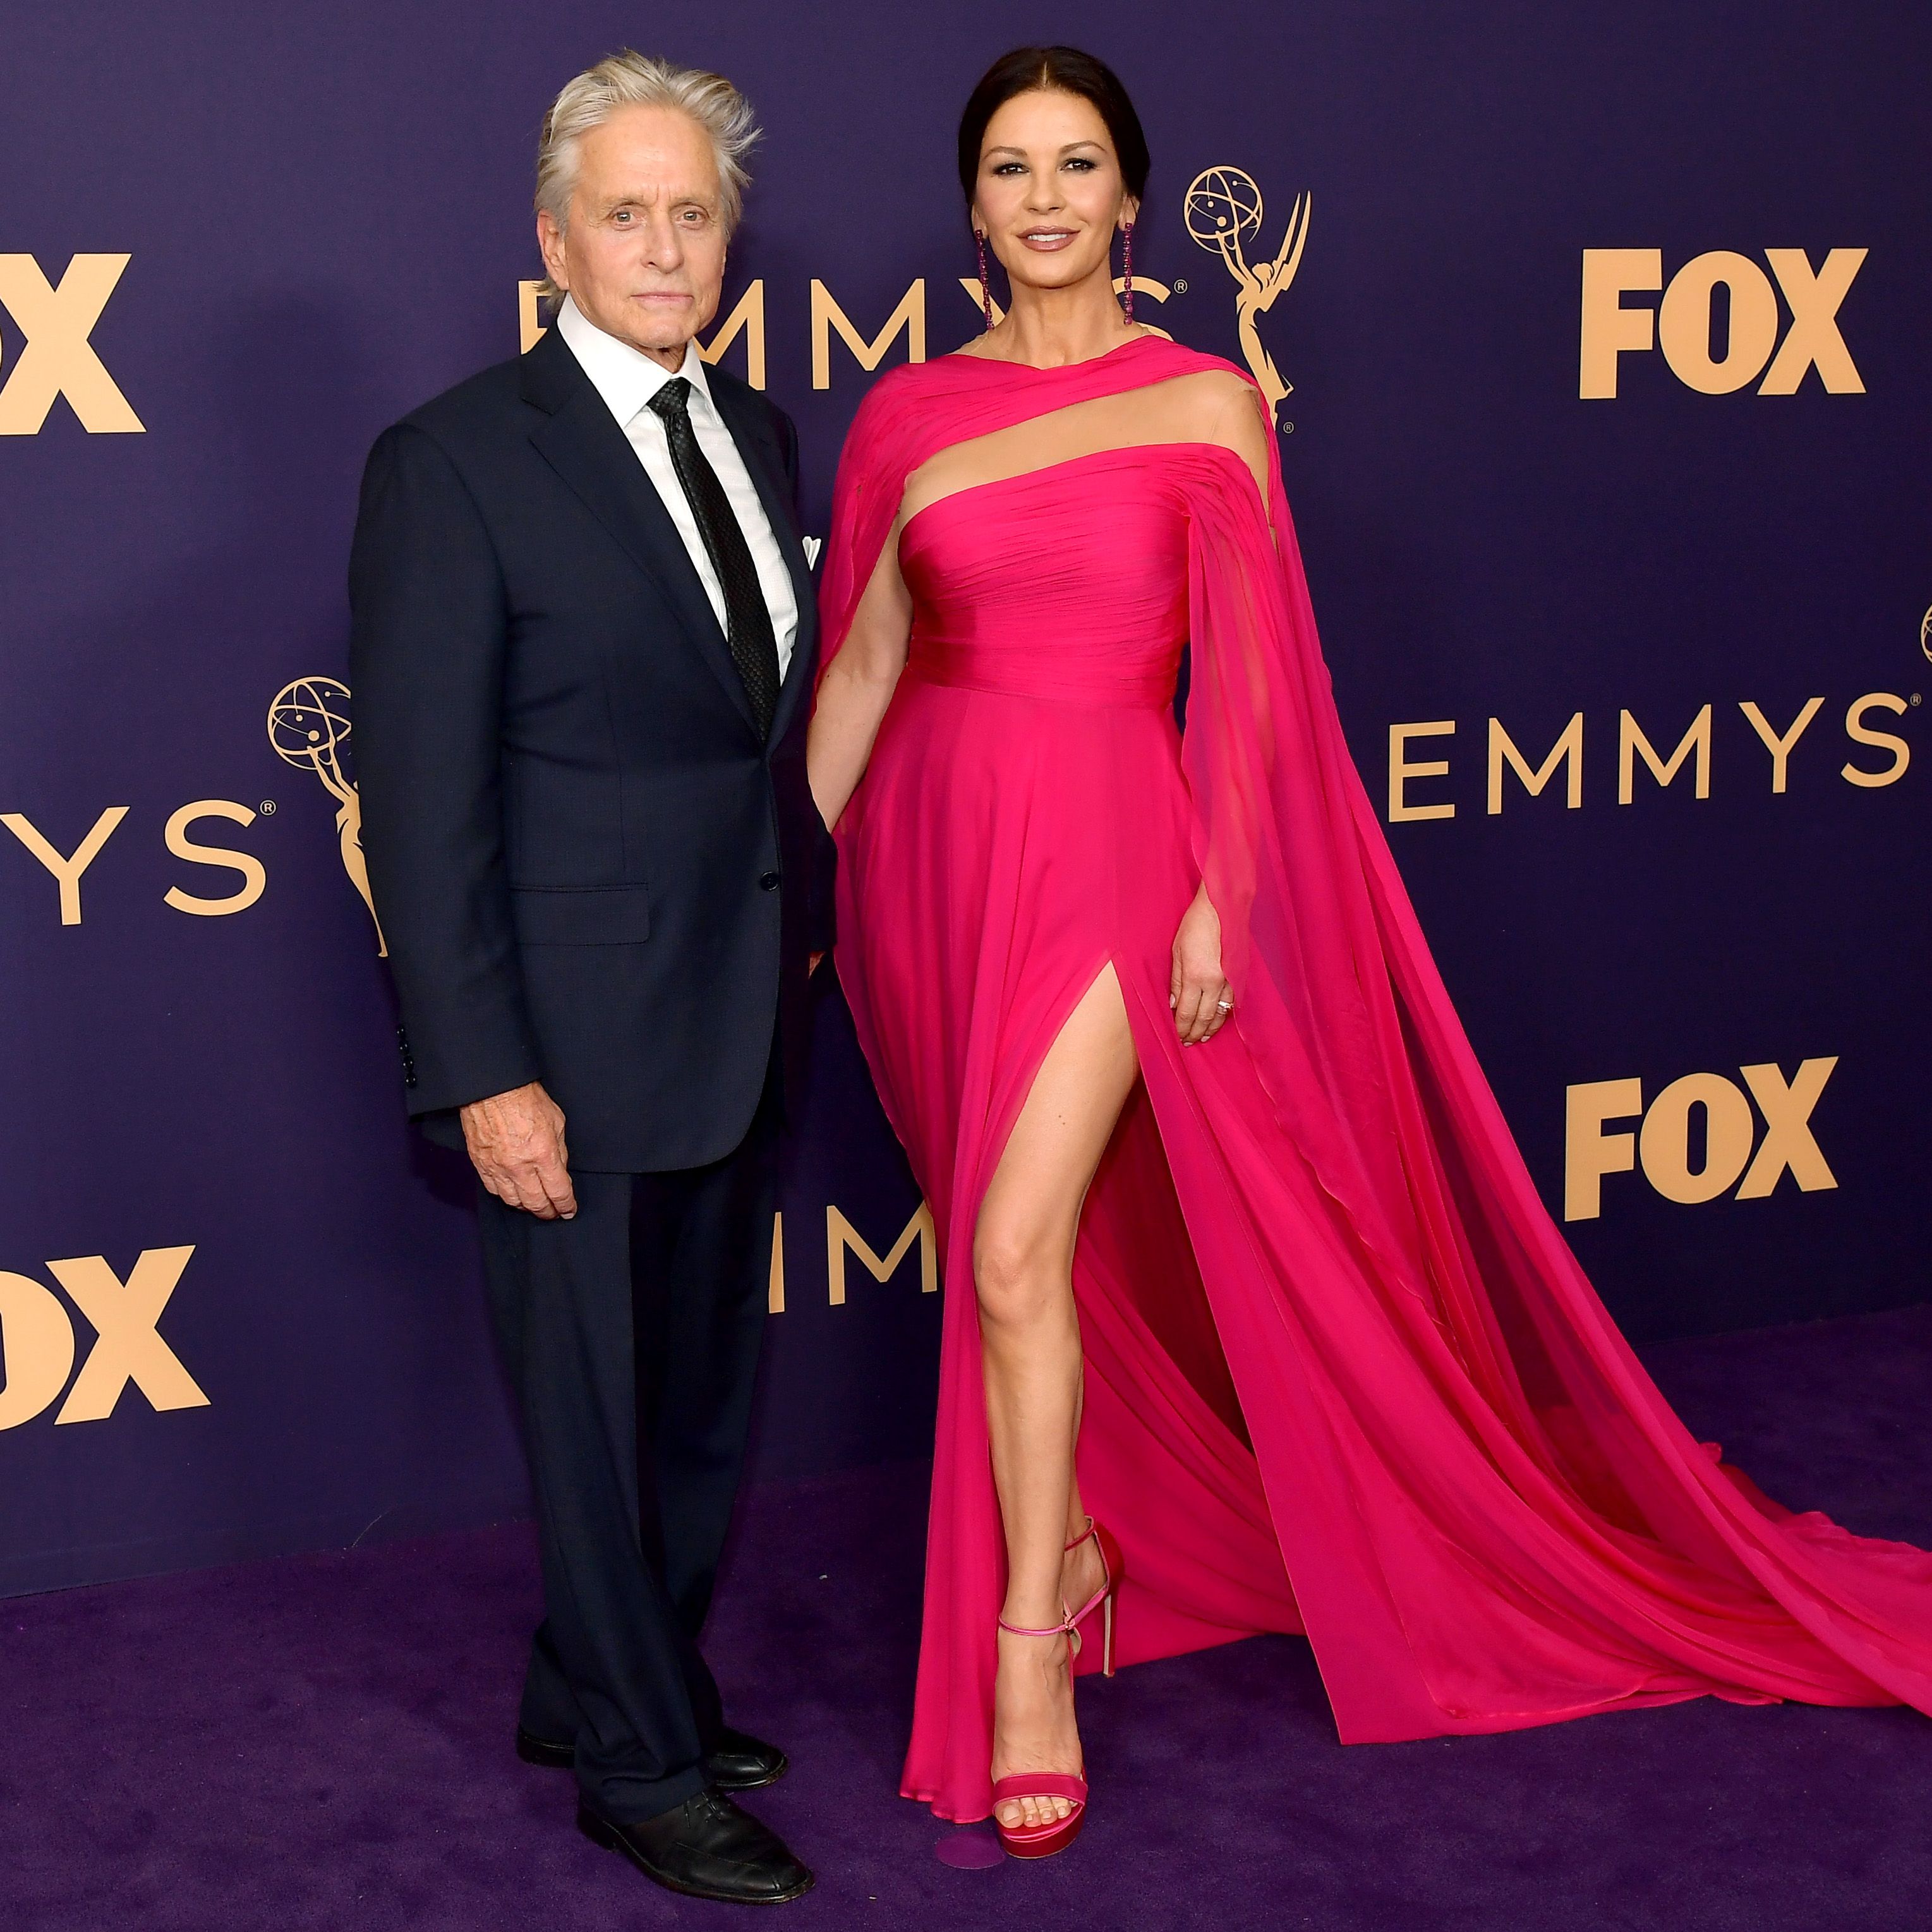 Michael Douglas and Catherine Zeta-Jones at the 71st Emmy Awards on September 22, 2019 in Los Angeles | Getty Images 